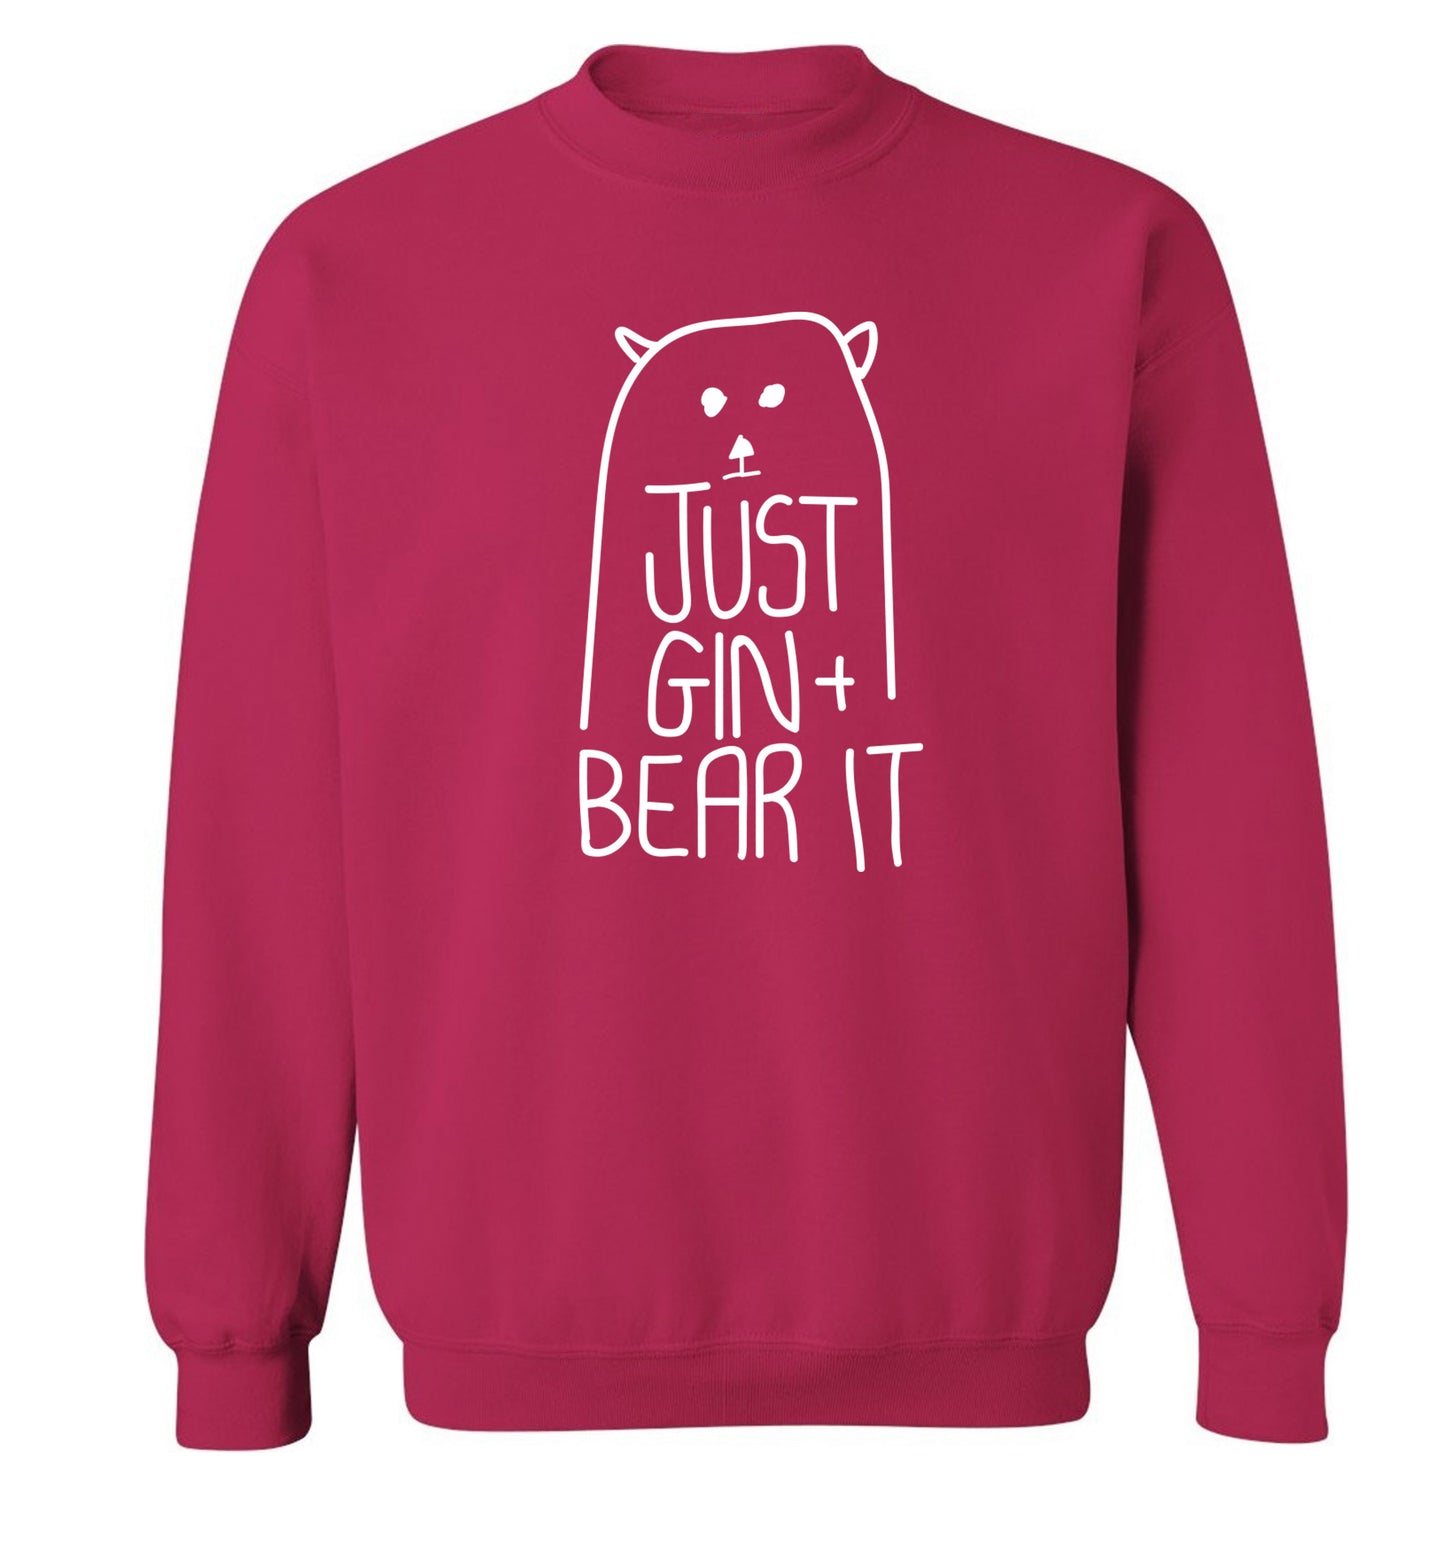 Just gin and bear it Adult's unisex pink Sweater 2XL